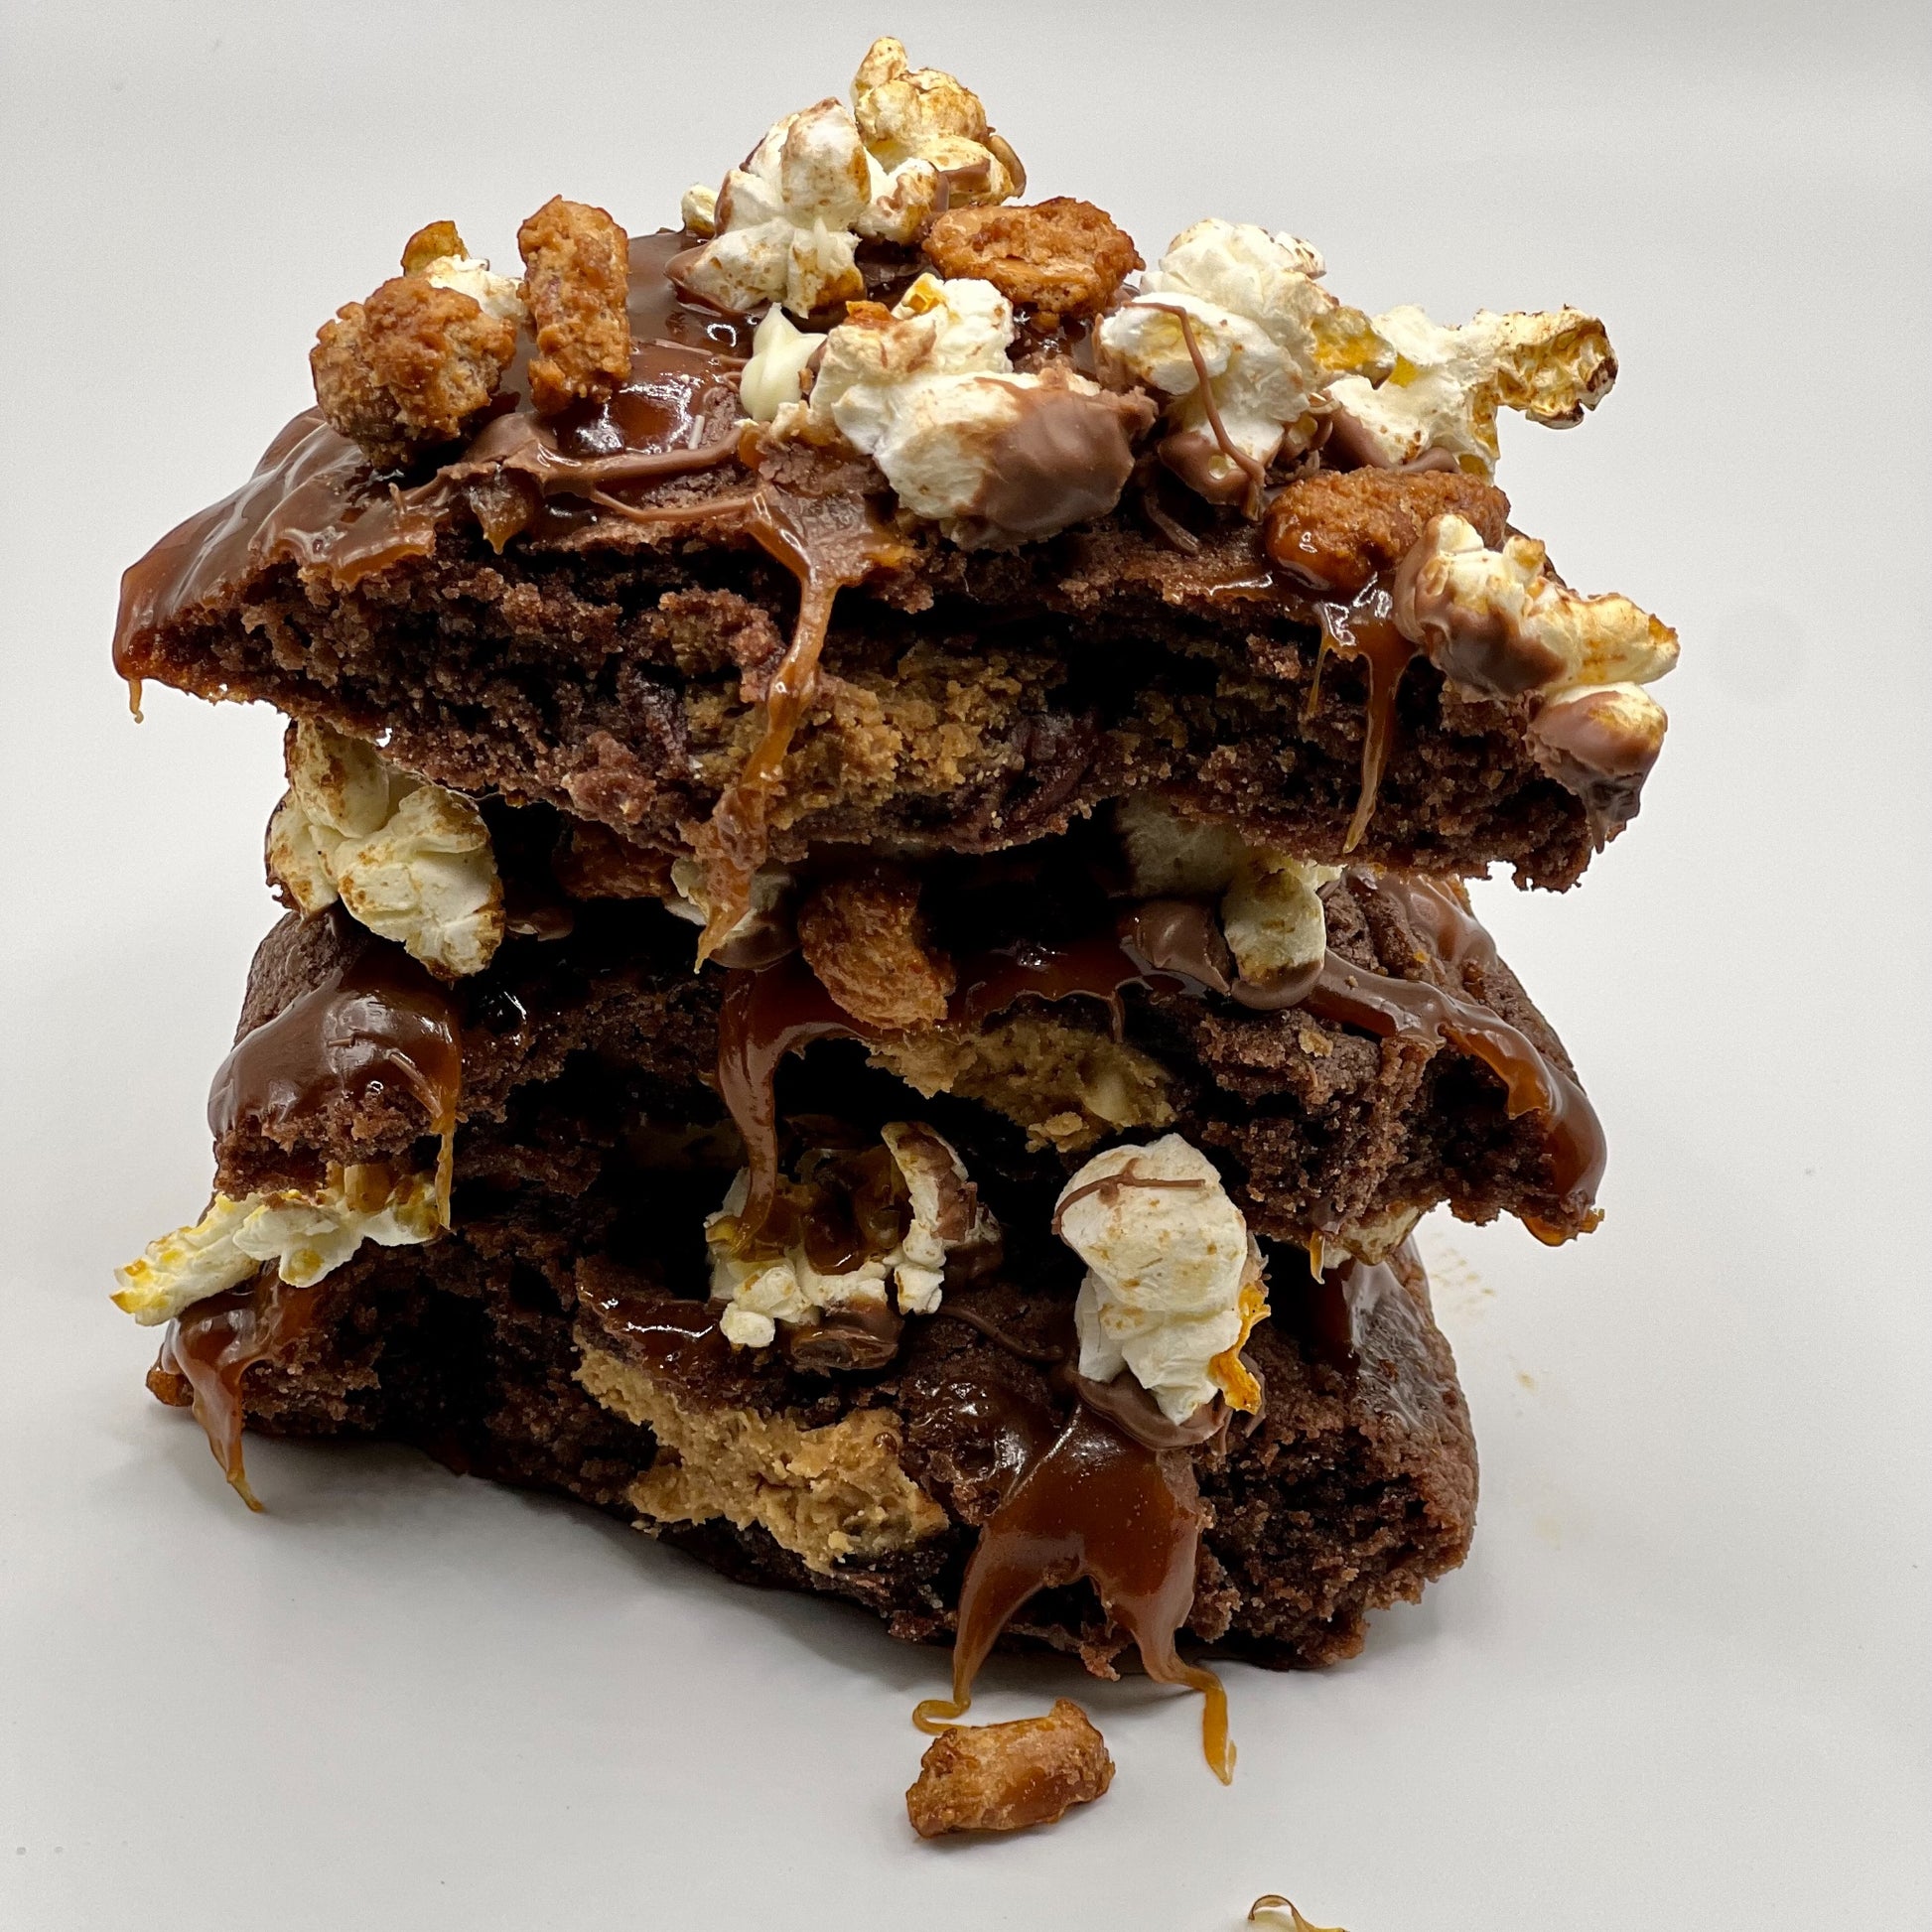 The Cinema Crunch Chocolate Cookie from The Dough Corner – featuring a blend of dark, milk, and white chocolate chips with a creamy peanut butter center, topped with caramel bits and candied peanuts. Perfect for a decadent dessert or movie night treat.